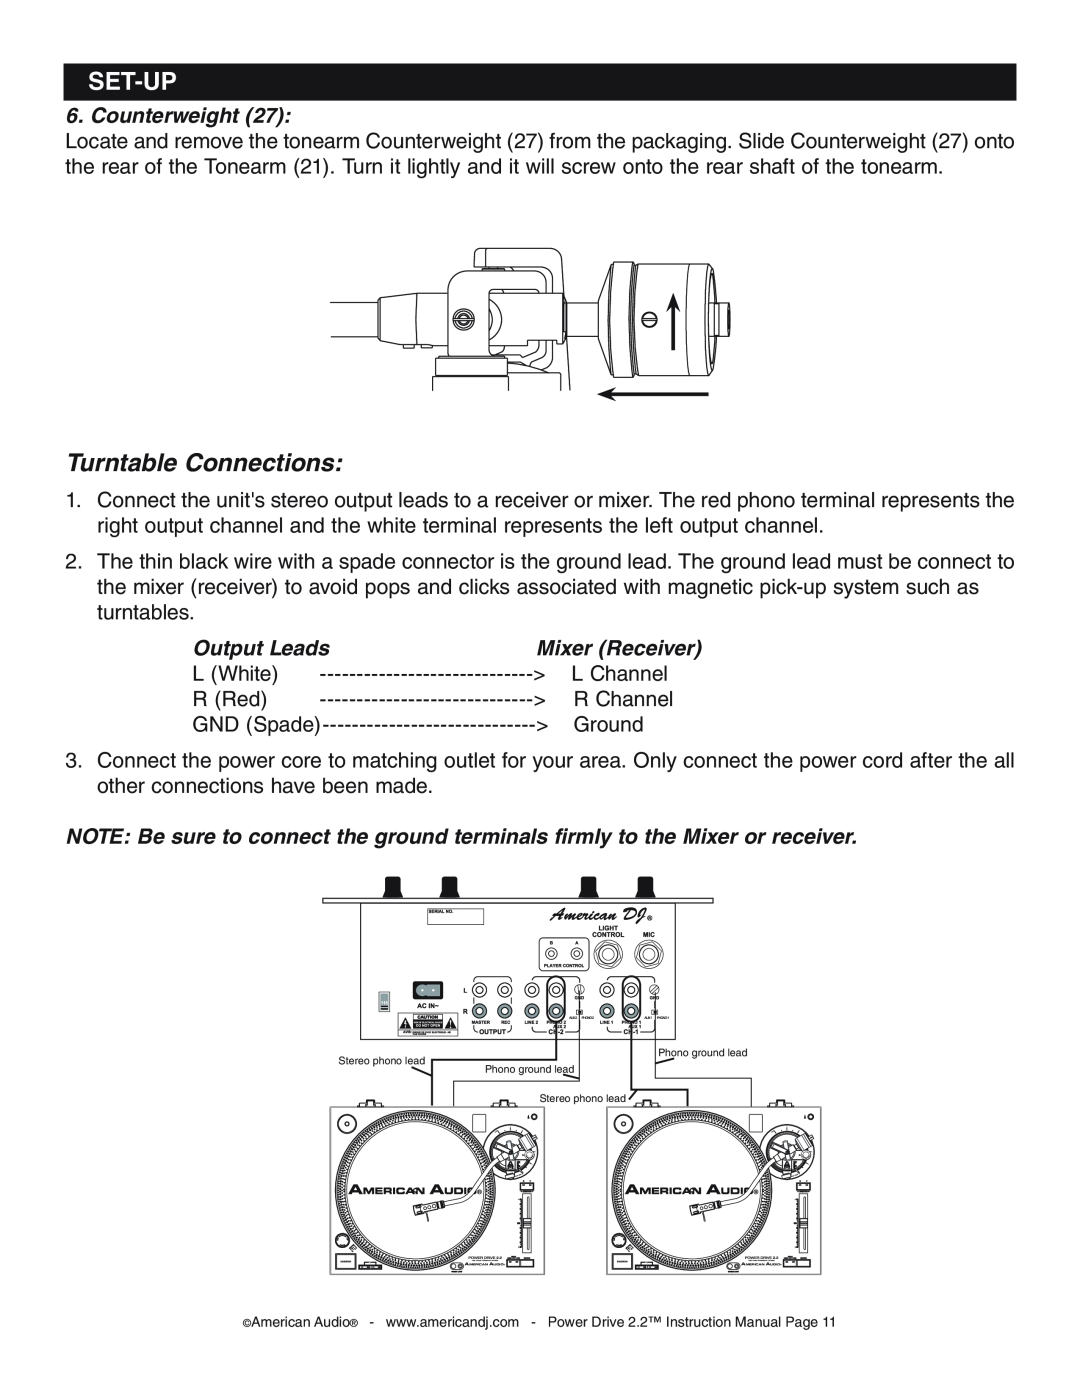 American Audio POWERDRIVE22.pdf manual Turntable Connections, Counterweight, Output Leads, Mixer Receiver, Set-Up 